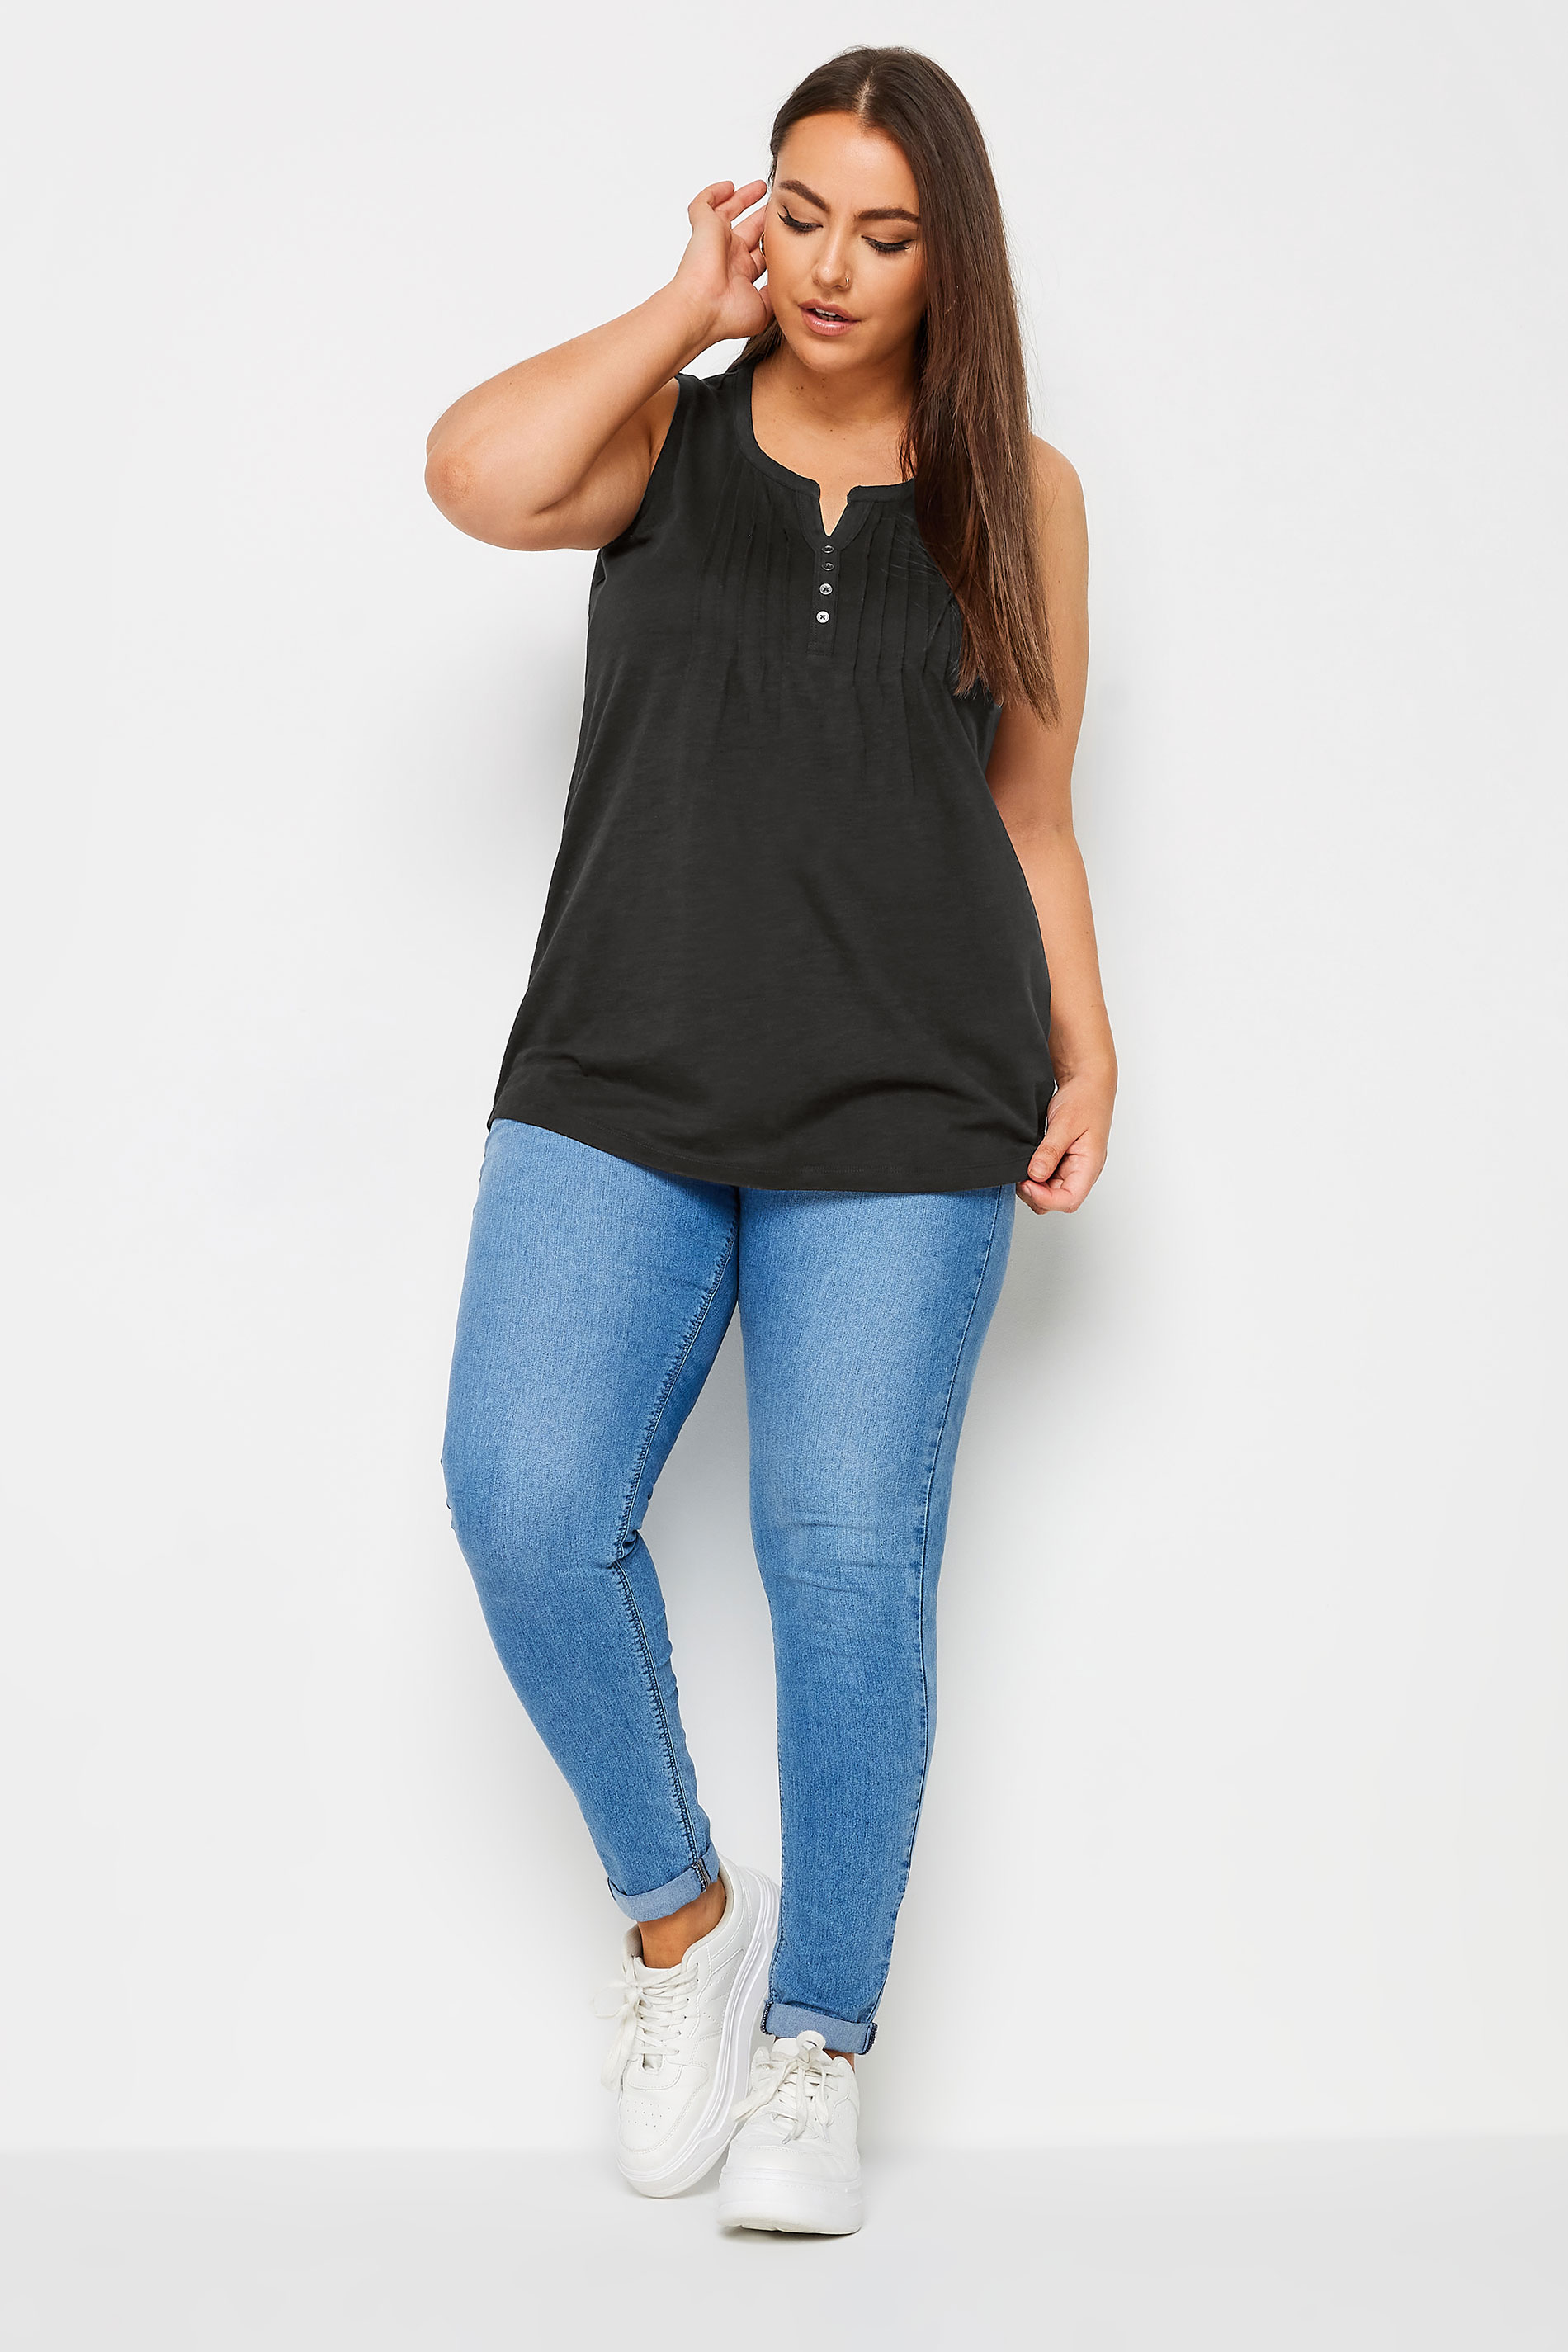 YOURS Plus Size Black Pintuck Henley Vest Top | Yours Clothing 2